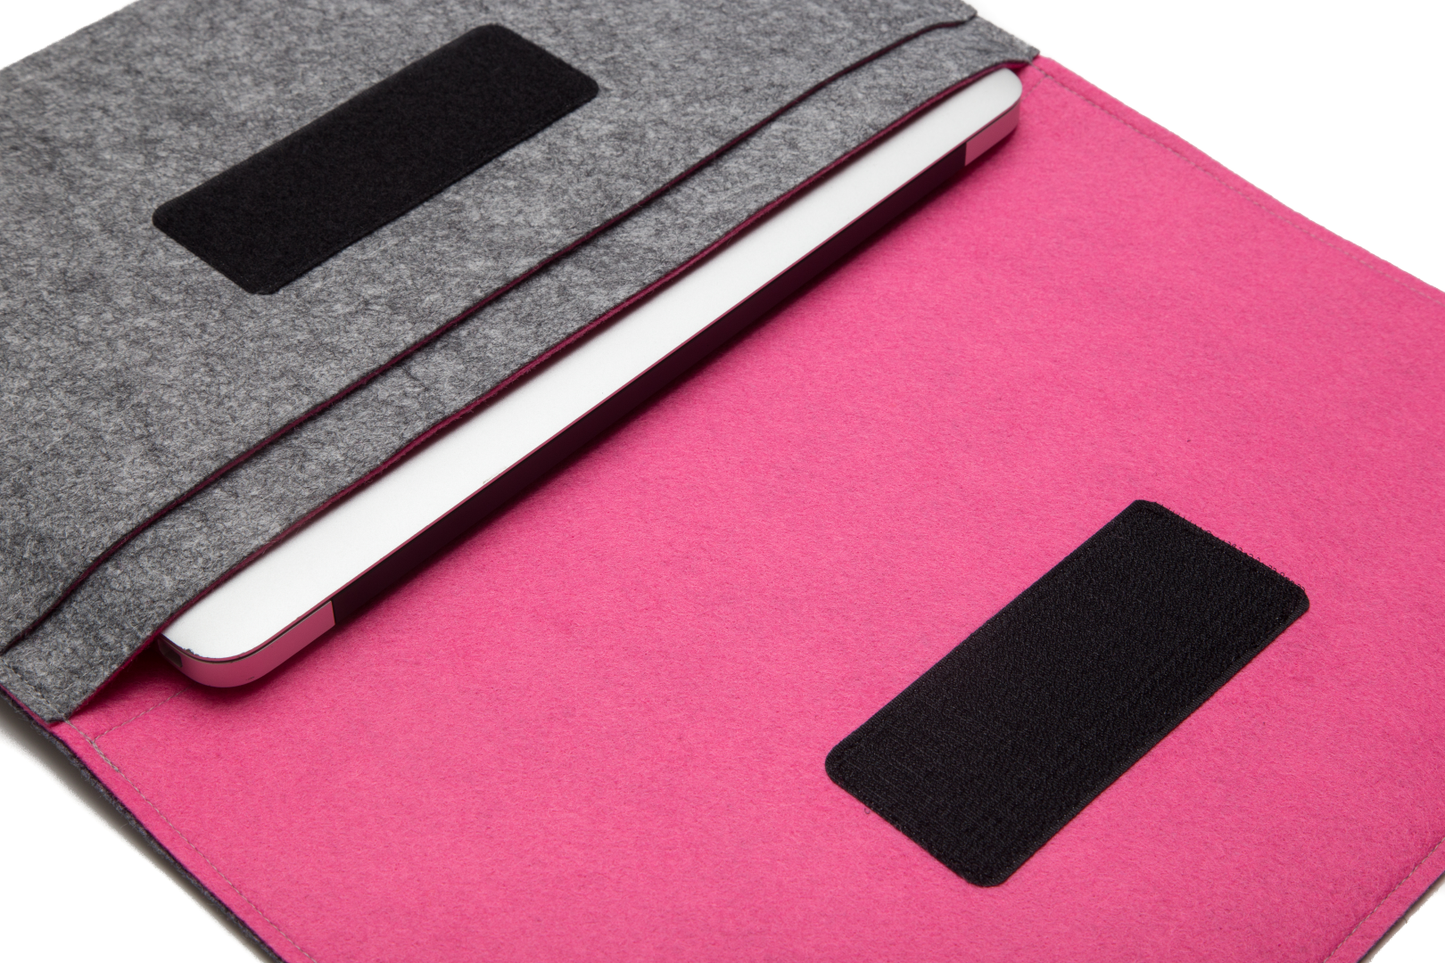 Handmade MacBook Cover with Accessories Pocket: Grey & Pink